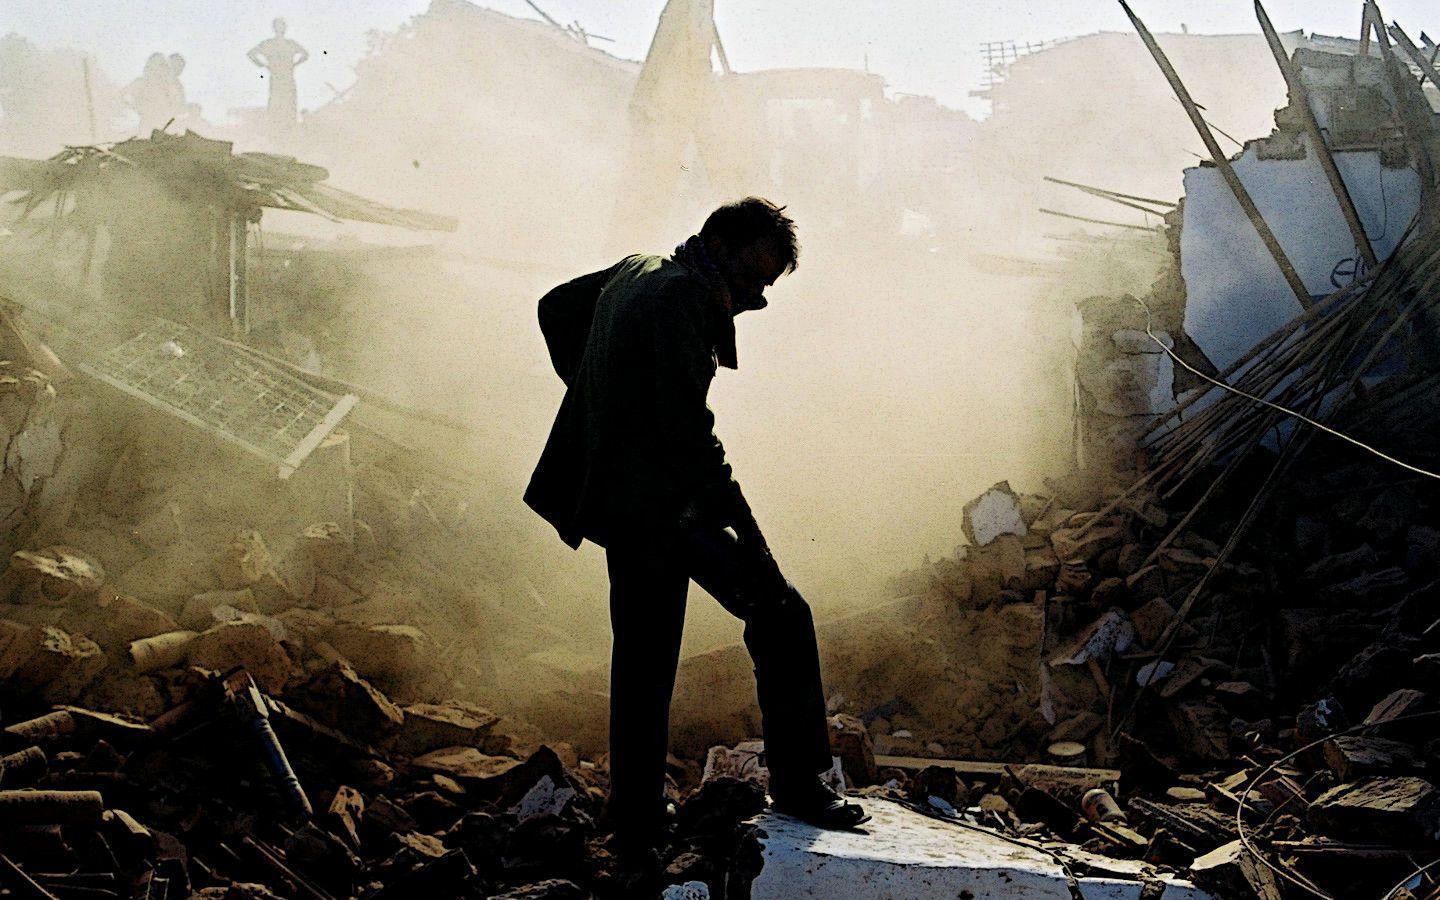 A powerful earthquake in Nepal claims 128 lives, and PM Modi expresses sorrow.